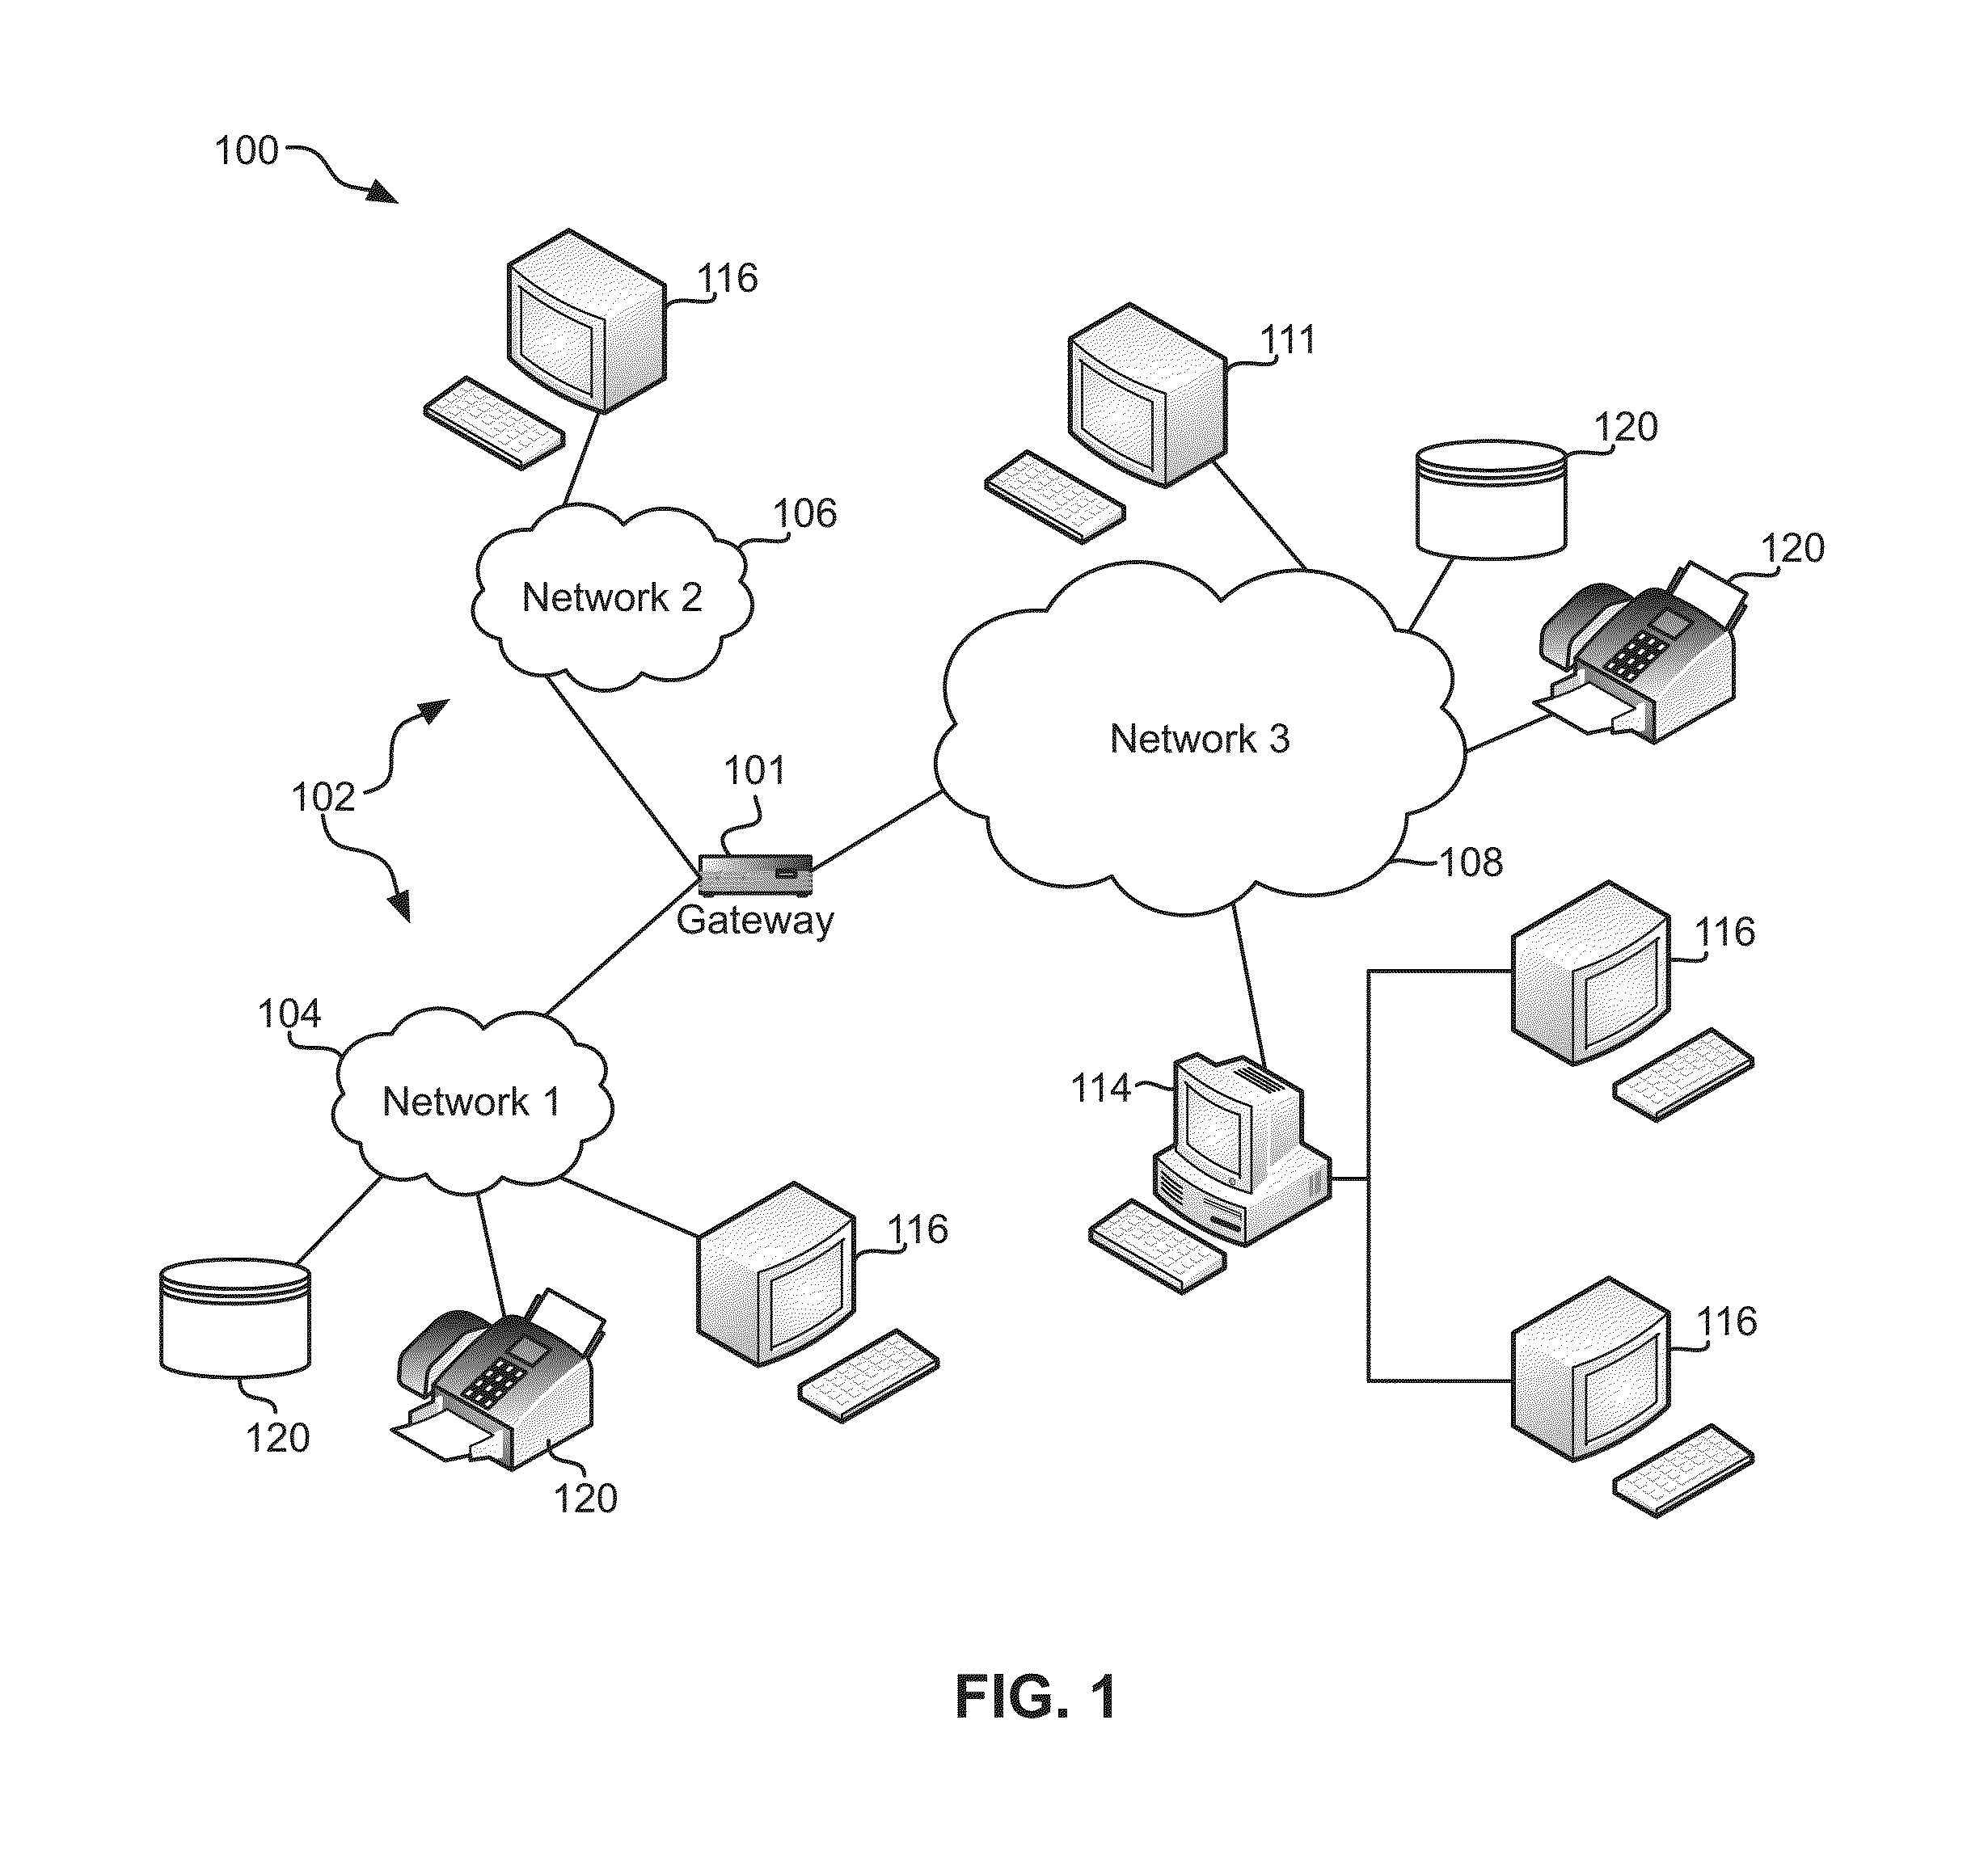 Systems and methods for selectively enabling and disabling hardware features